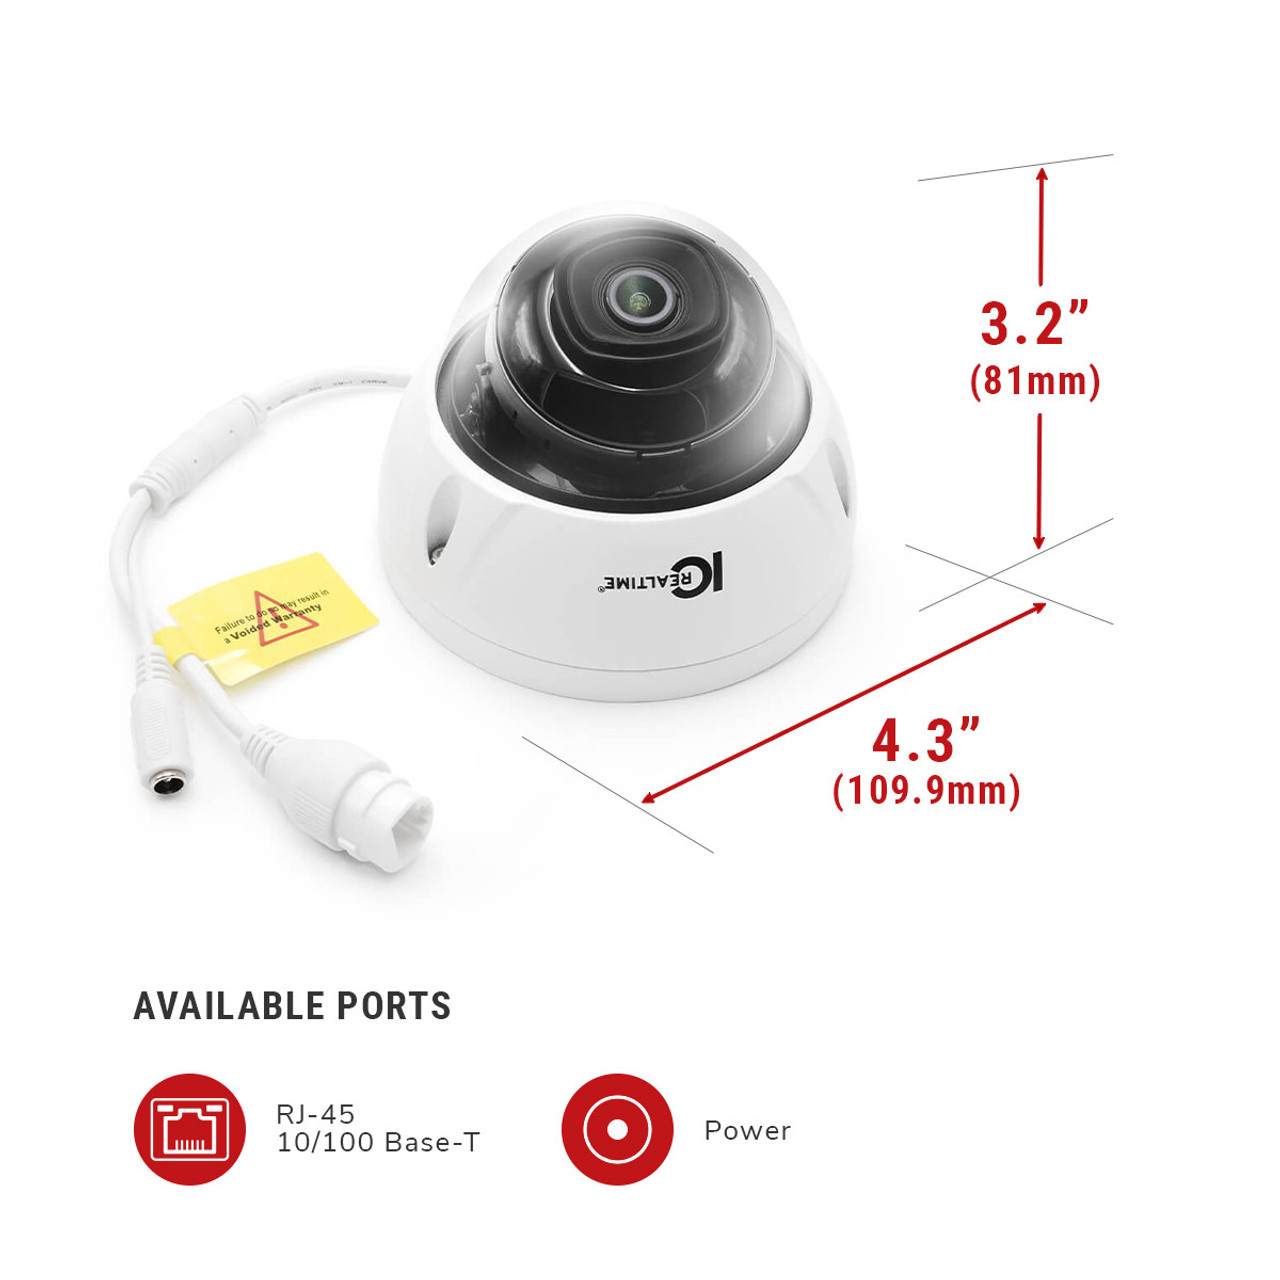 IC Realtime Edge 4MP 2.8mm Lens Outdoor Vandal PoE Dome IP Camera